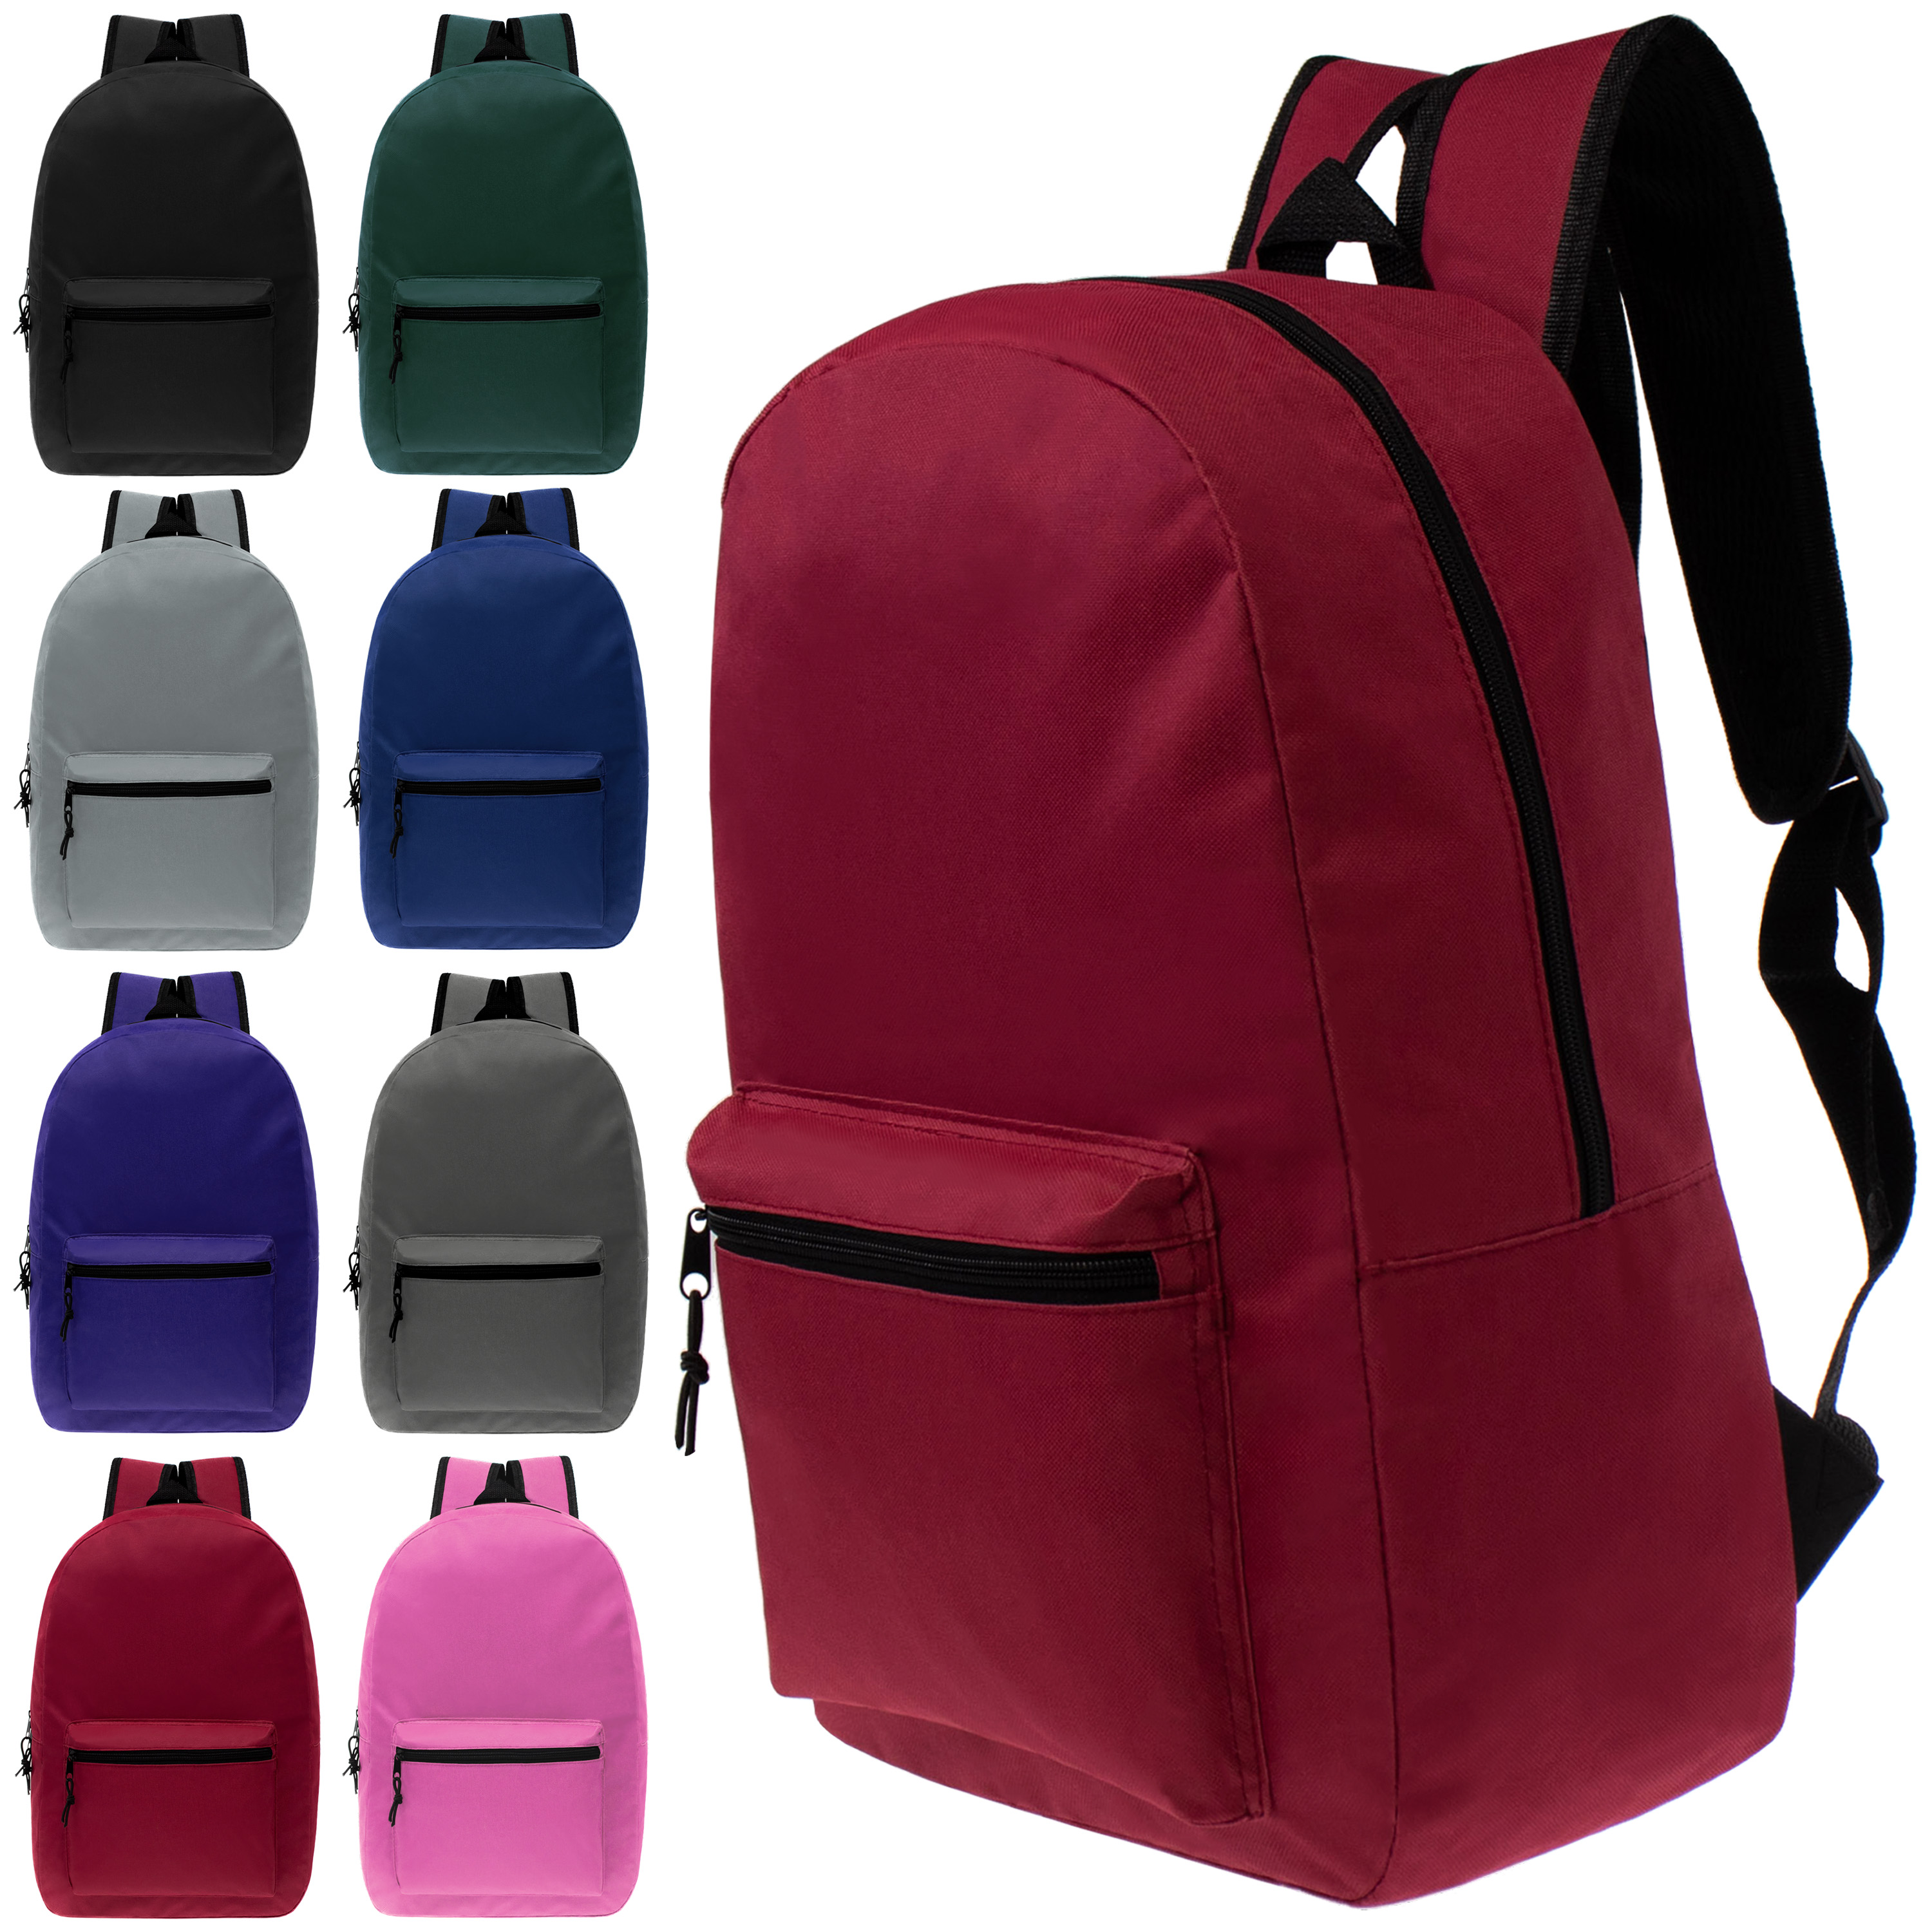 ''17'''' Lightweight Classic Style BACKPACKs w/ Adjustable Padded Straps - Pastel & Assorted Colors''